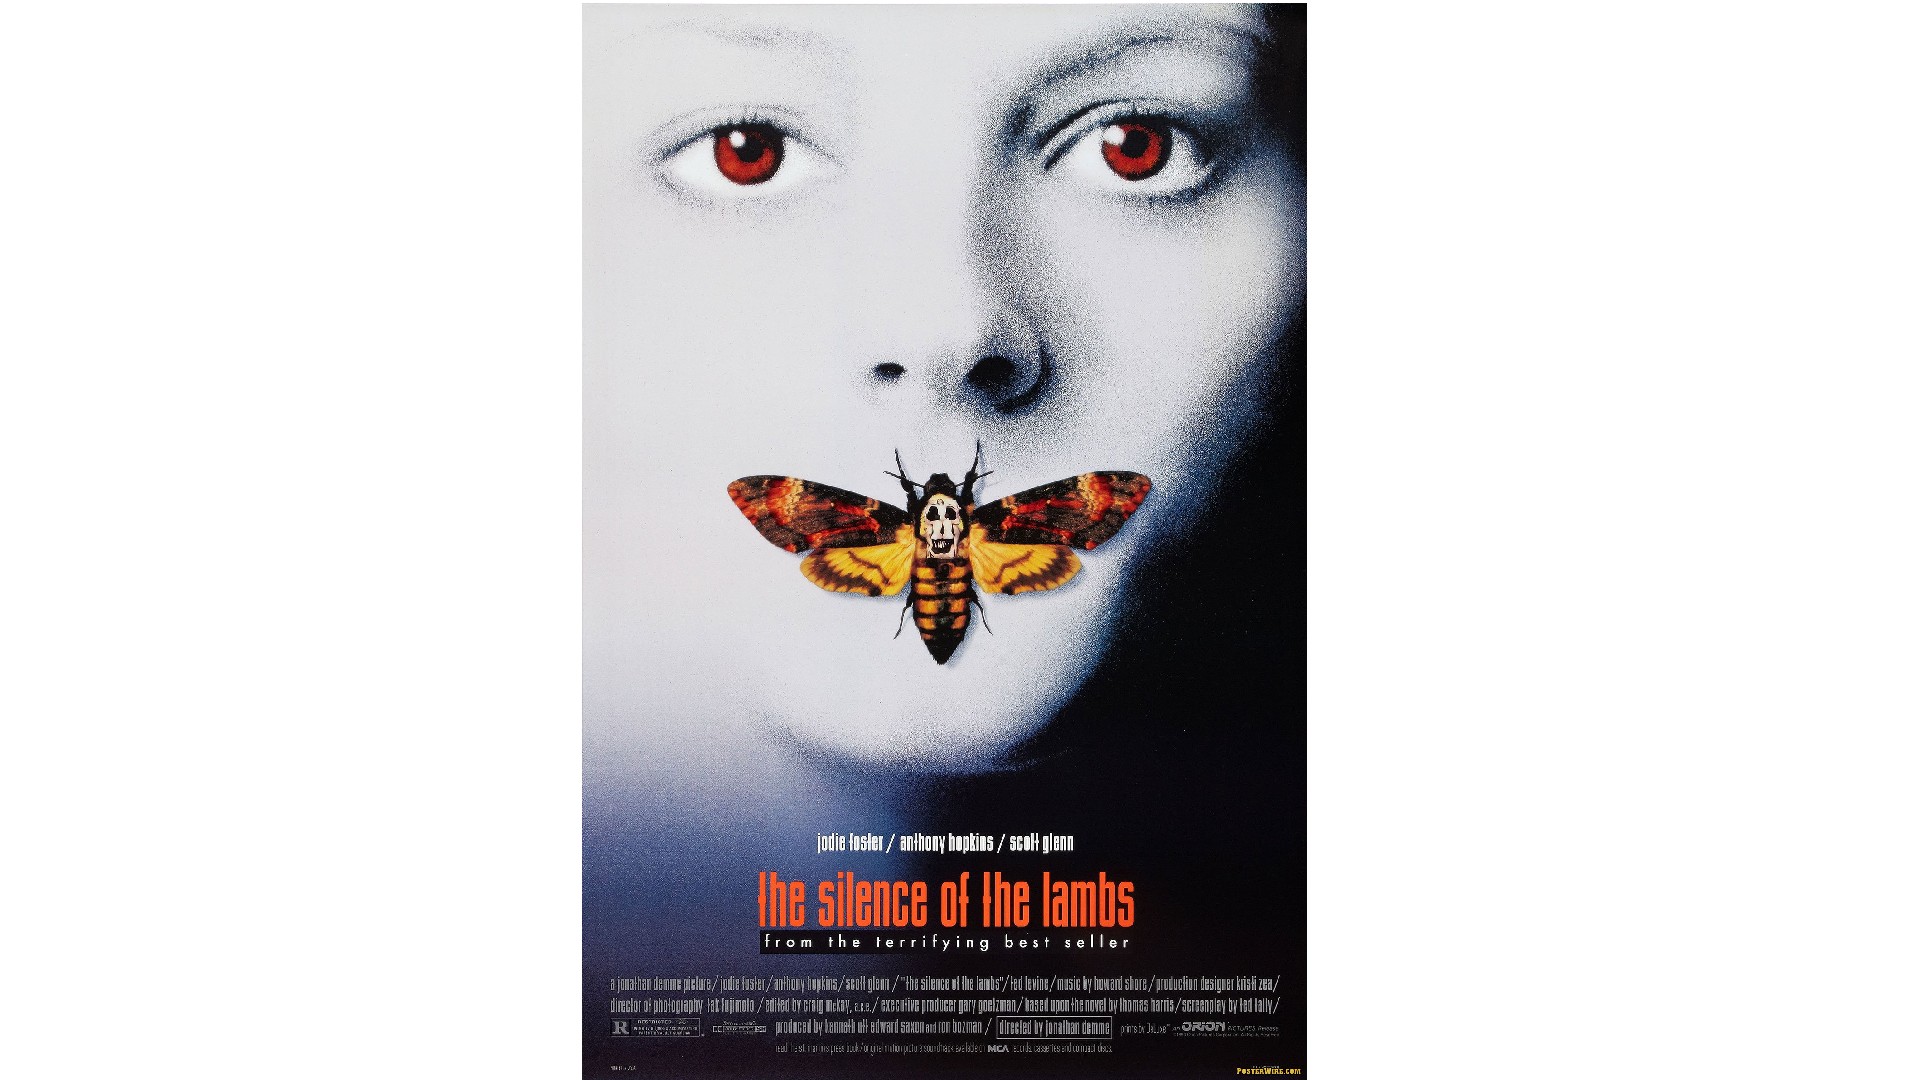 Horror film poster for Silence of the Lambs